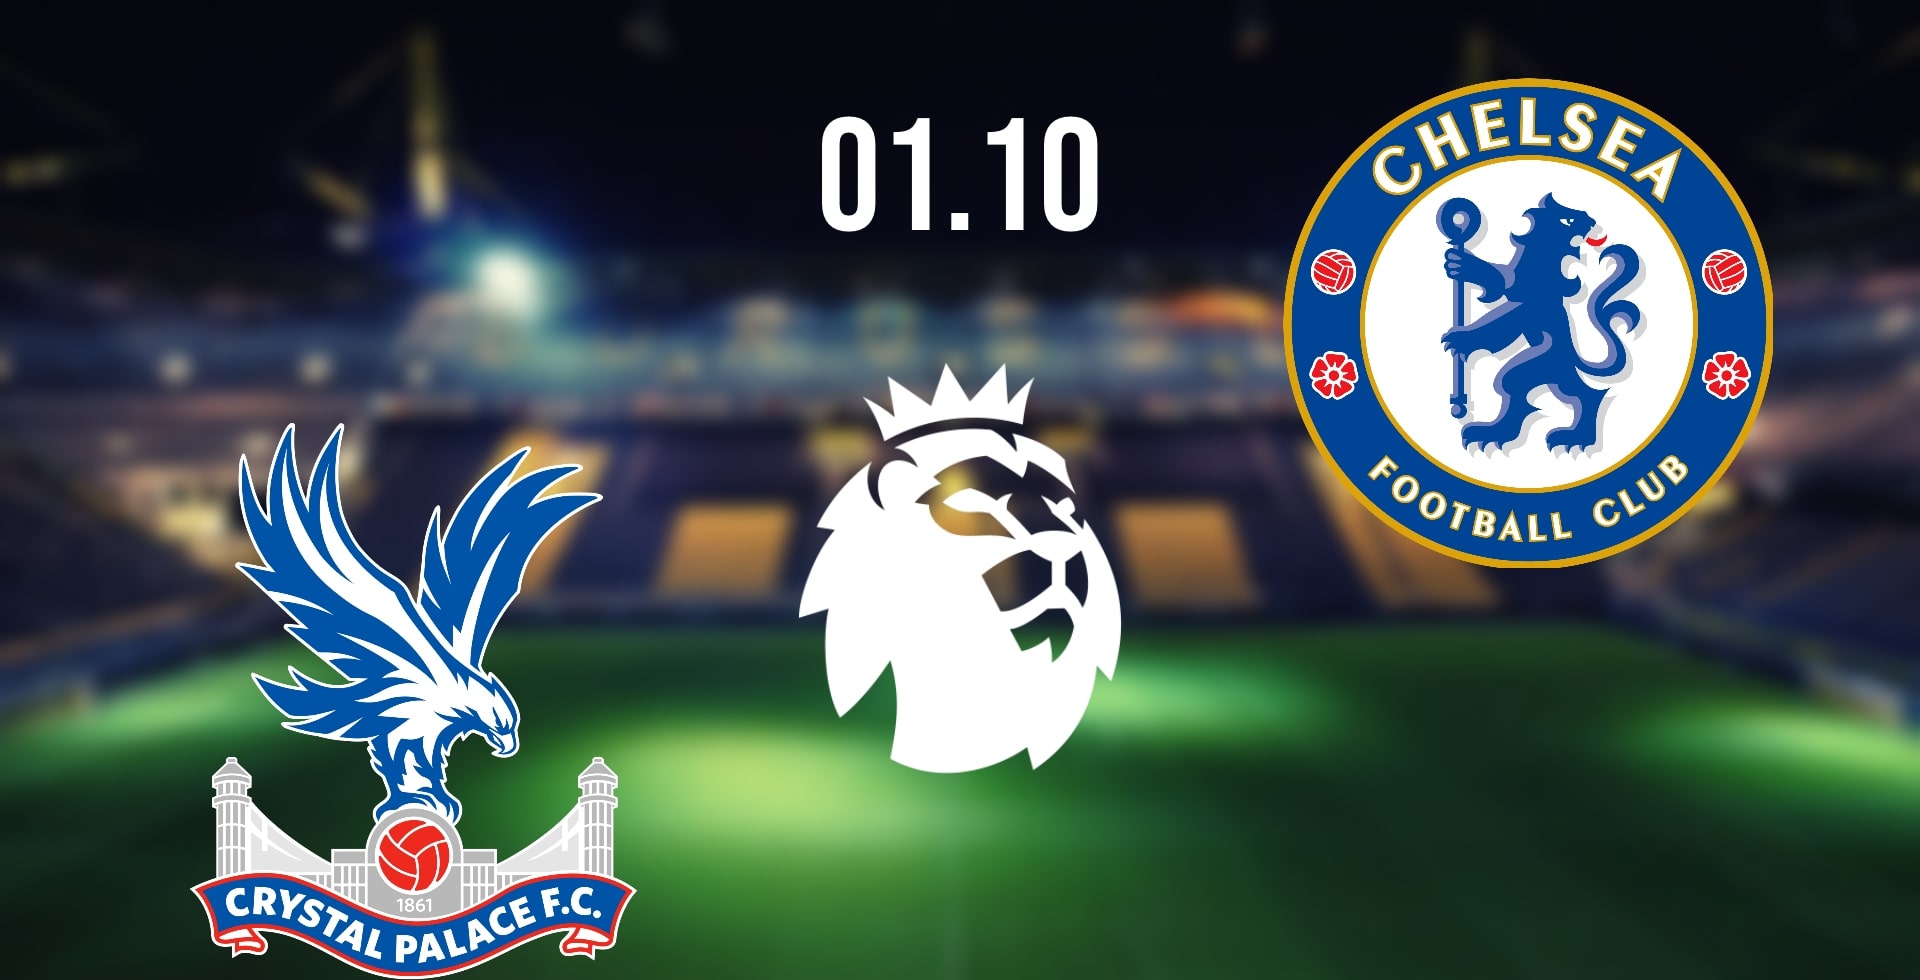 Crystal Palace vs Chelsea Prediction: EPL Match on 01.10.2022